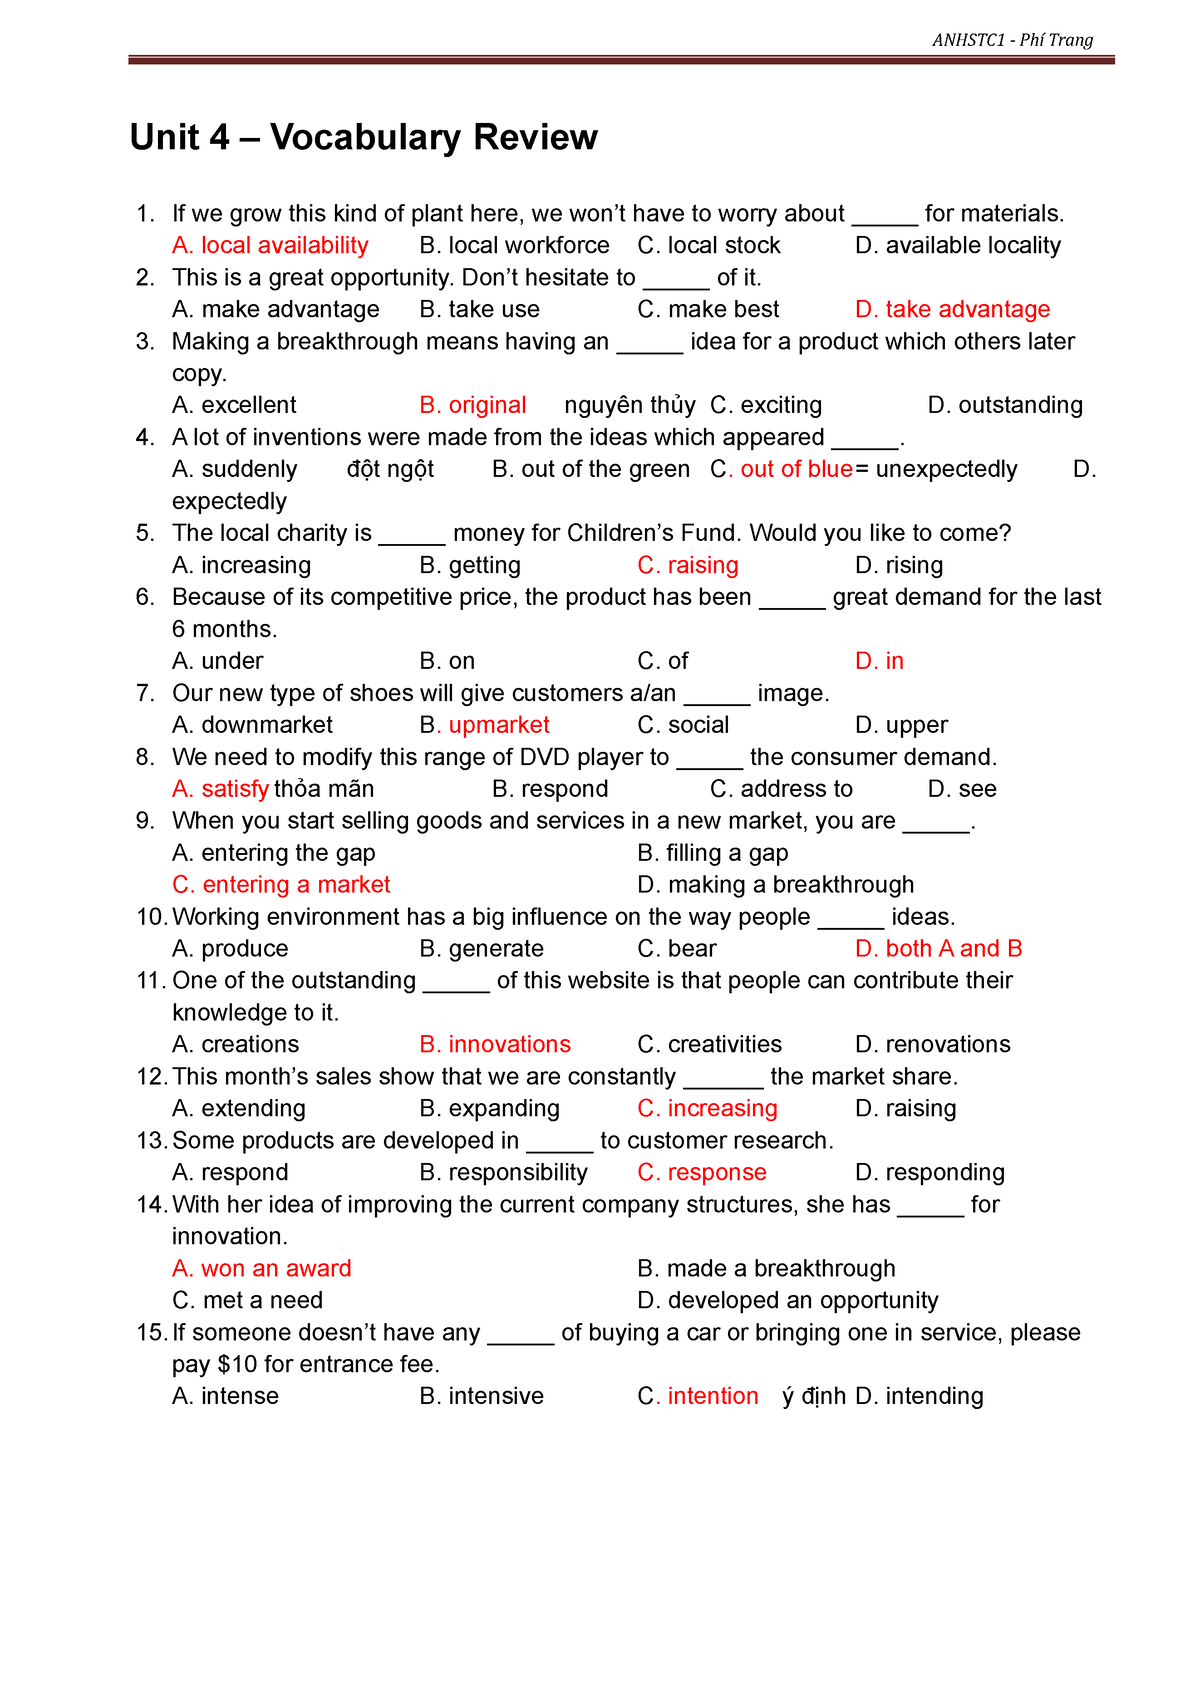 assignment terms review 4 1 (practice)